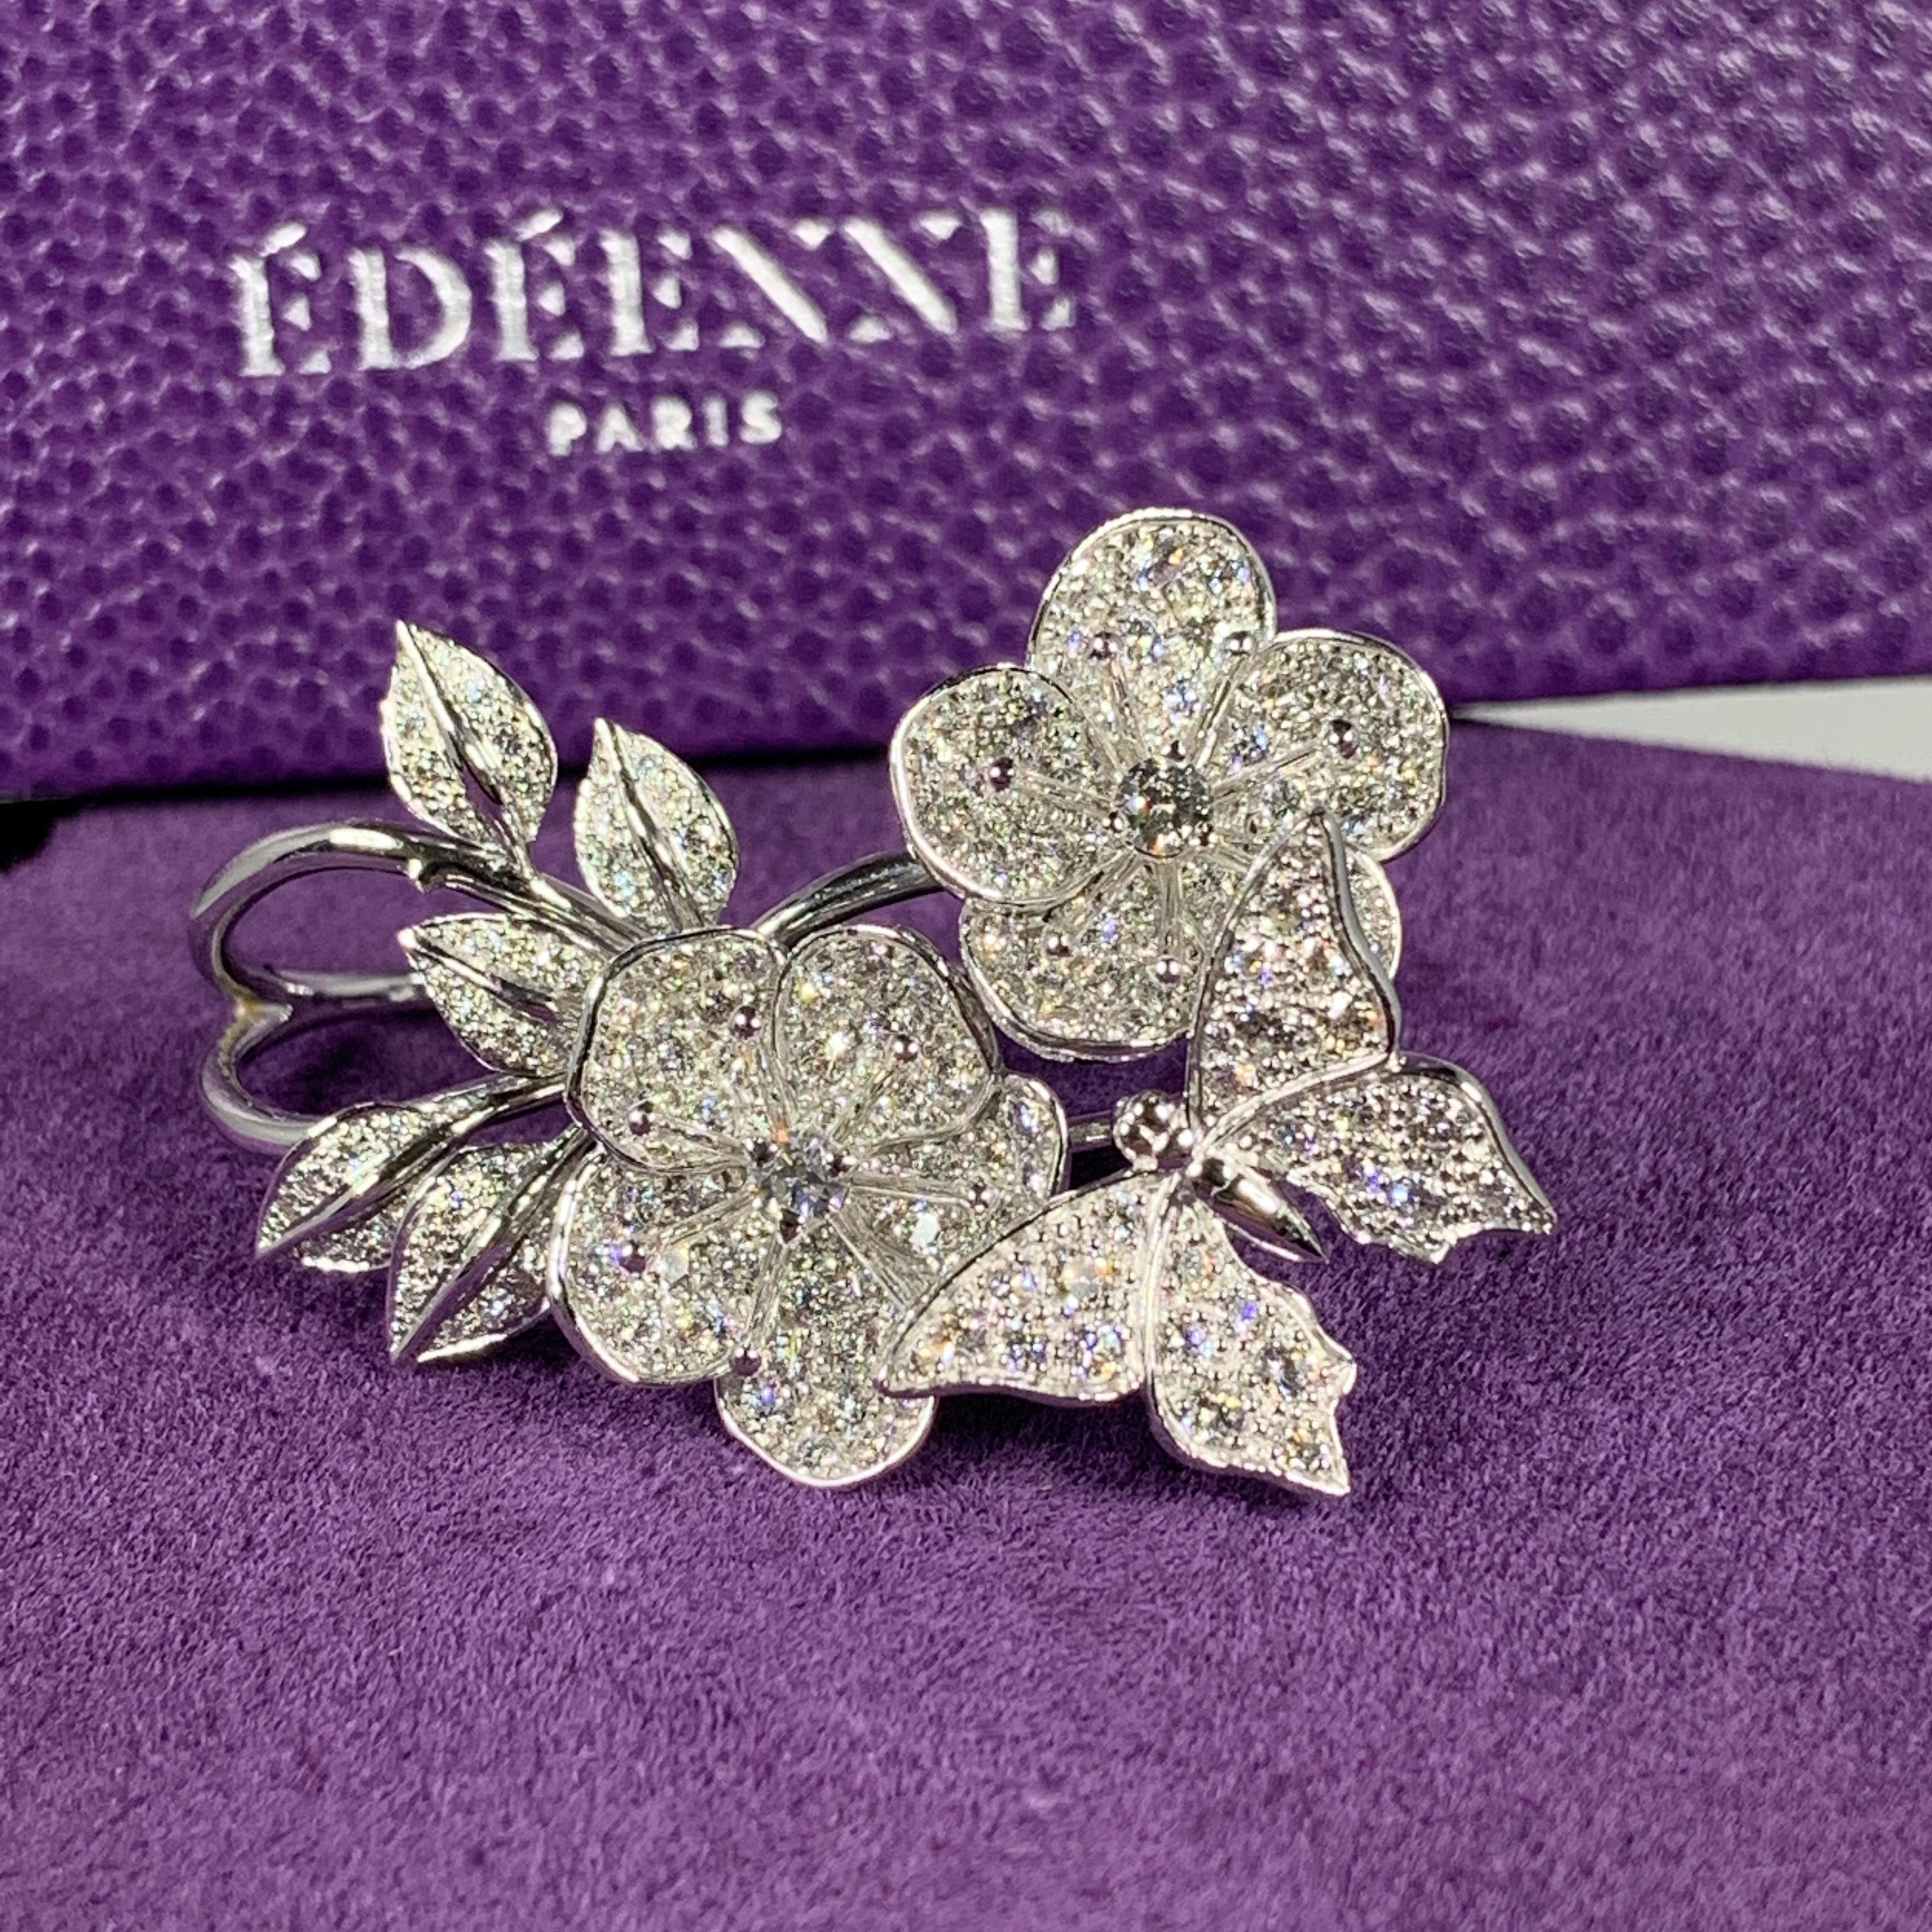 Butterflies and Blossom Ring in Diamonds and 18K White Gold by Édéenne, Paris For Sale 1